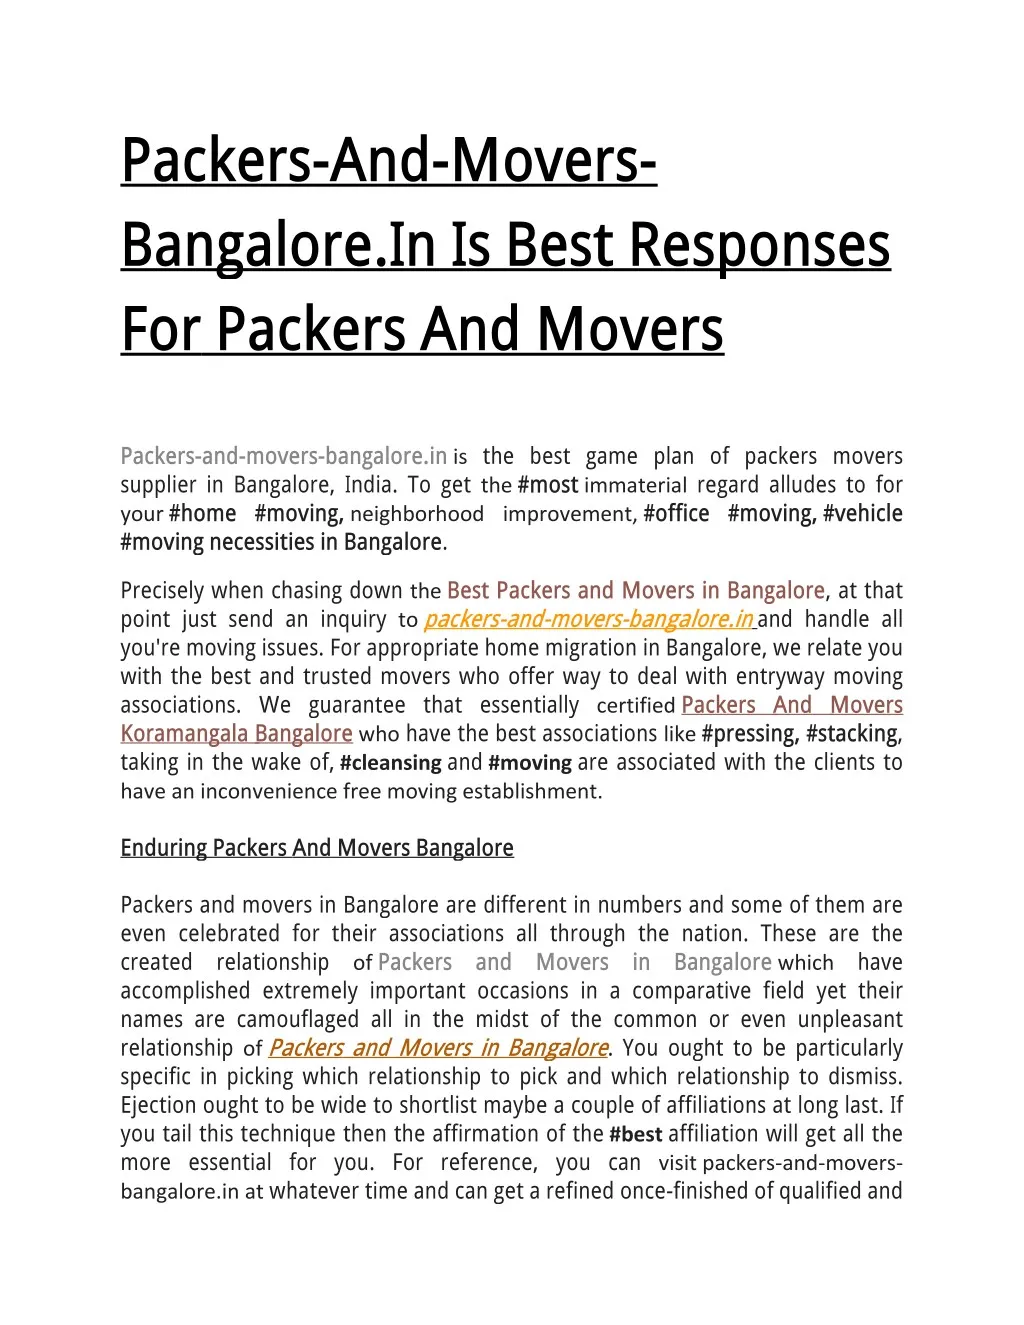 packers and movers bangalore in is best responses